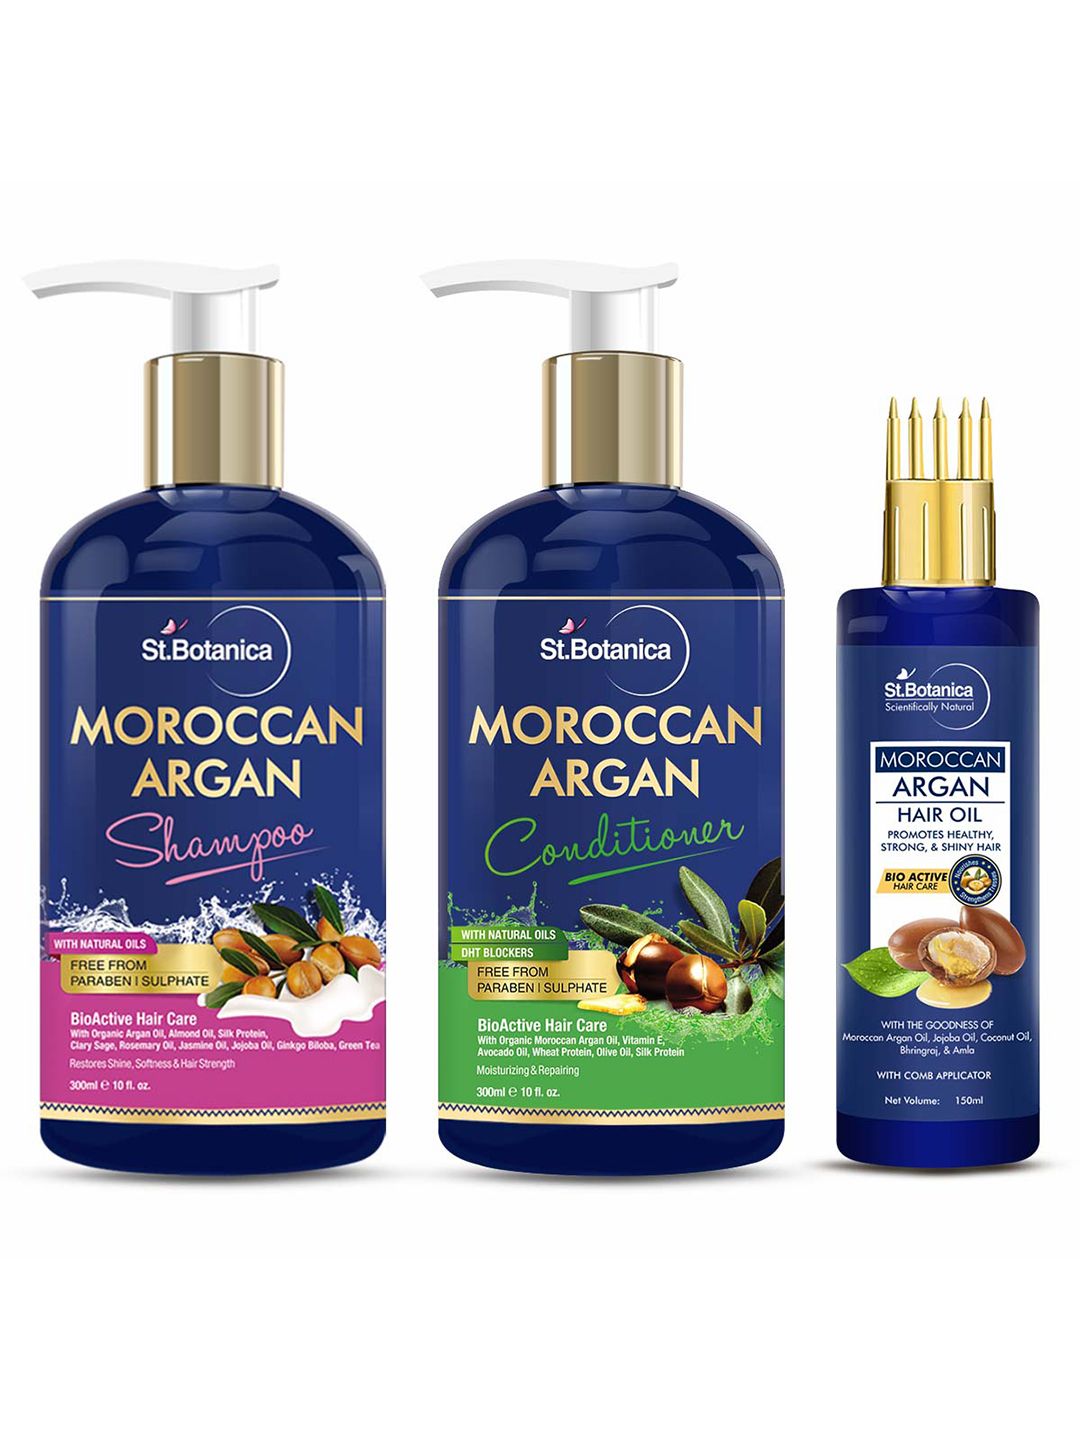 StBotanica Set of 3 Moroccan Argan Shampoo + Conditioner + Hair Oil With Comb Applicator Price in India